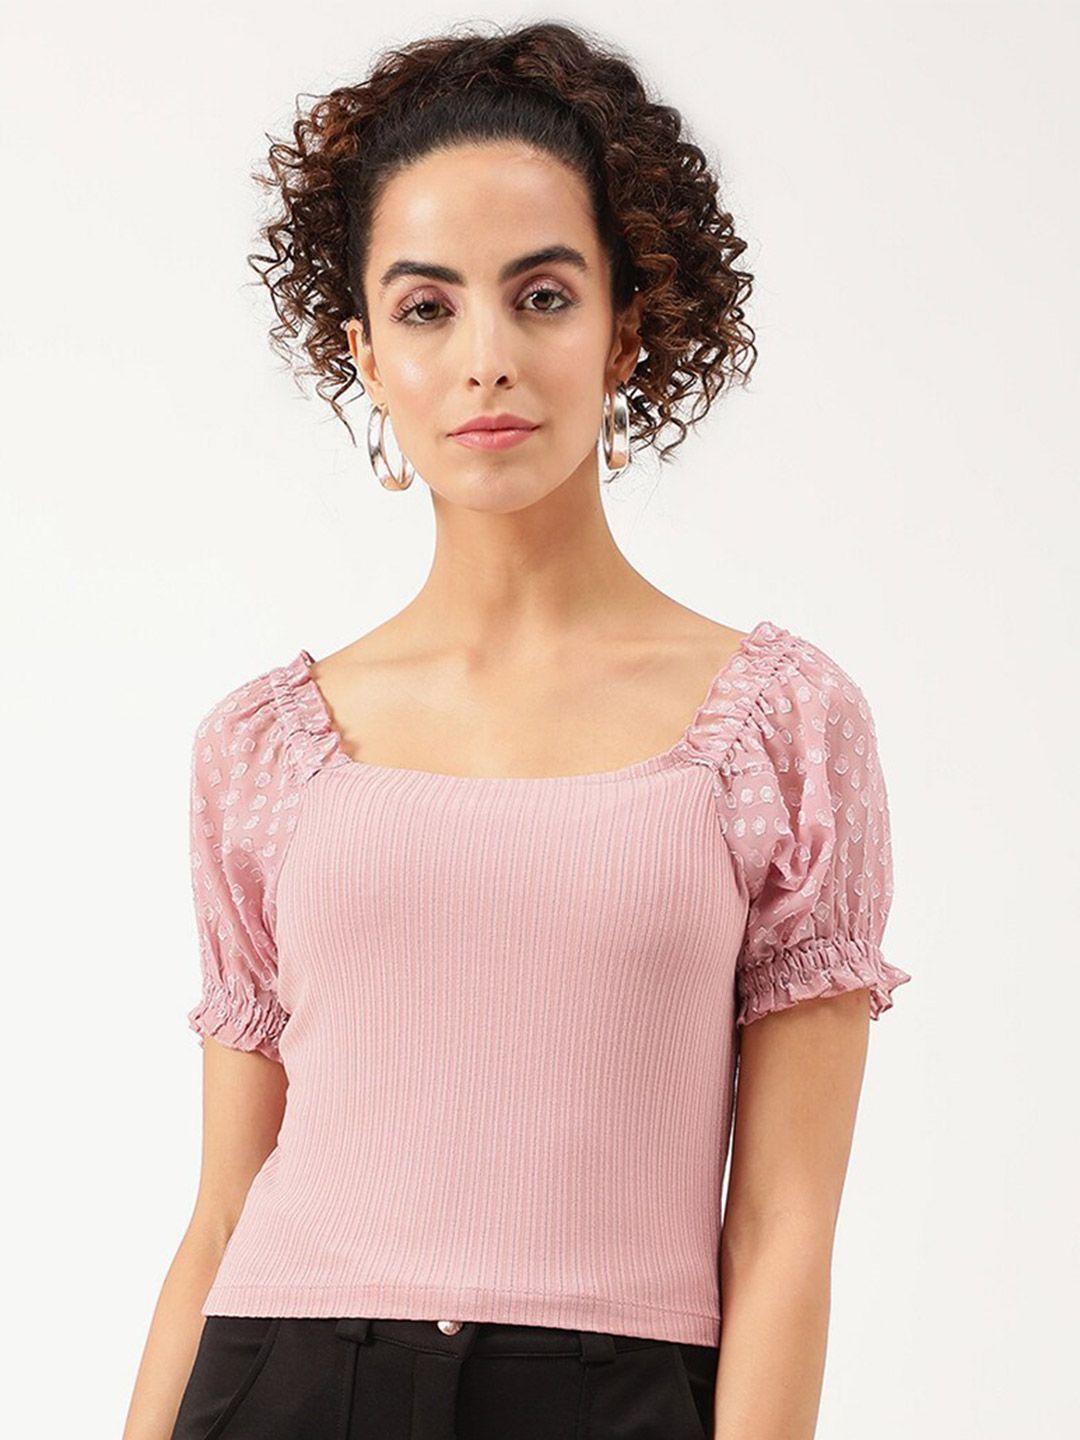 centrestage women pink square neck top